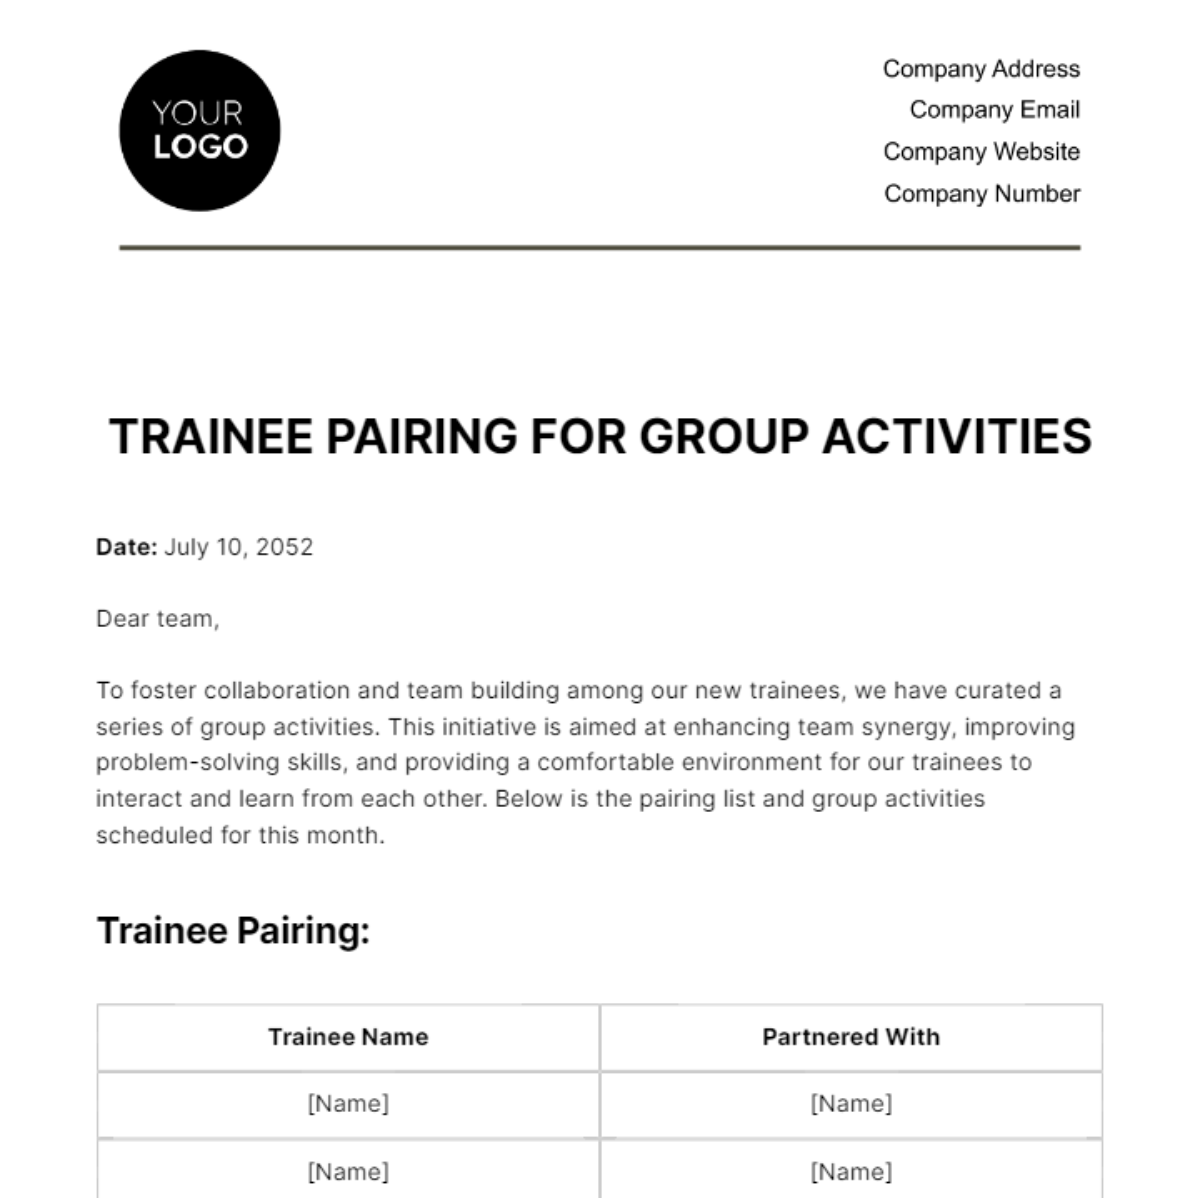 Free Trainee Pairing for Group Activities HR Template